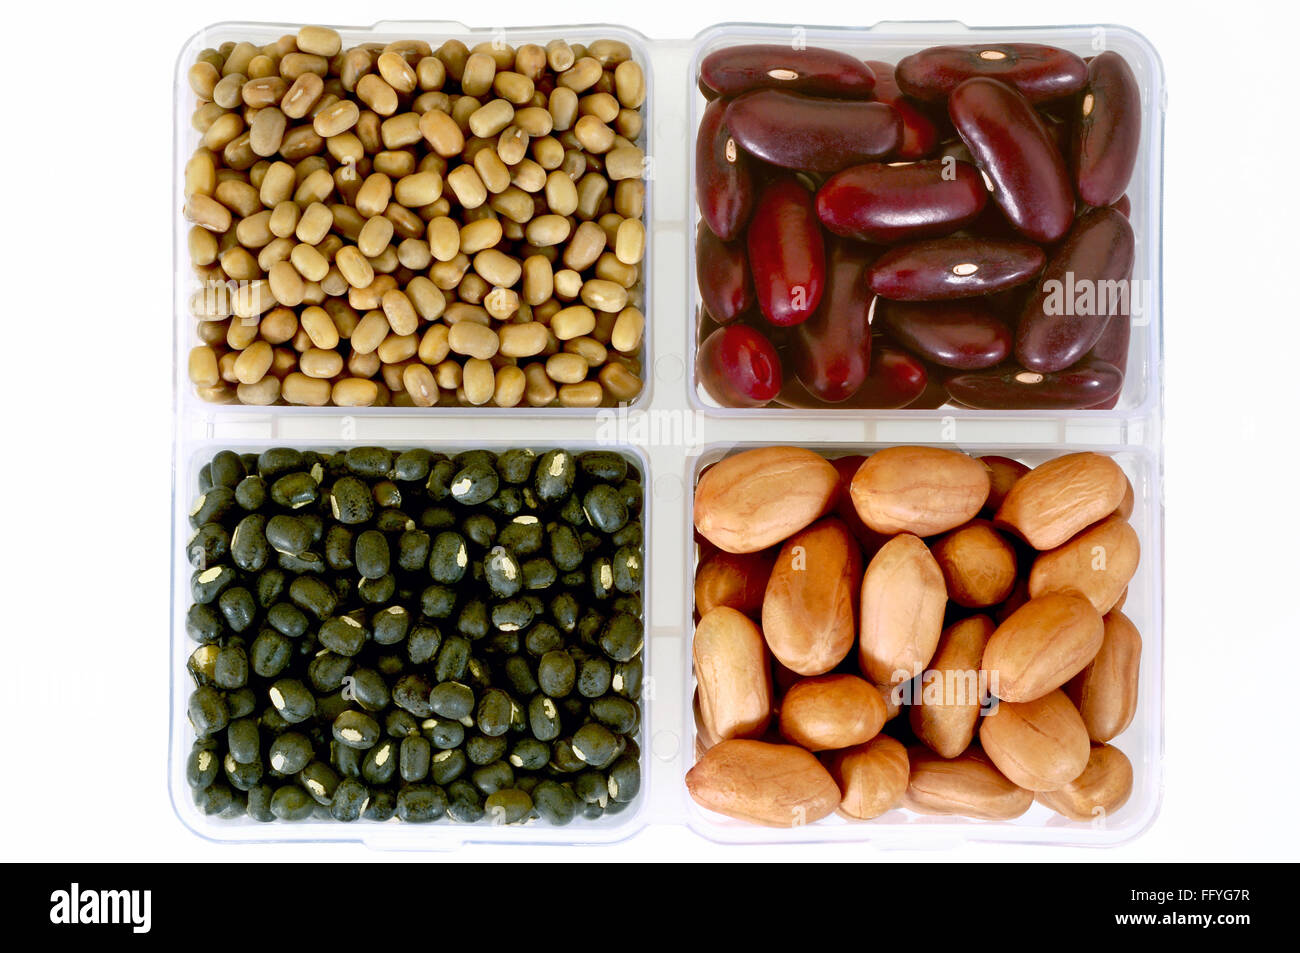 Pulses moath beans kindey beans black lentils and peanut in square dish ; India Stock Photo